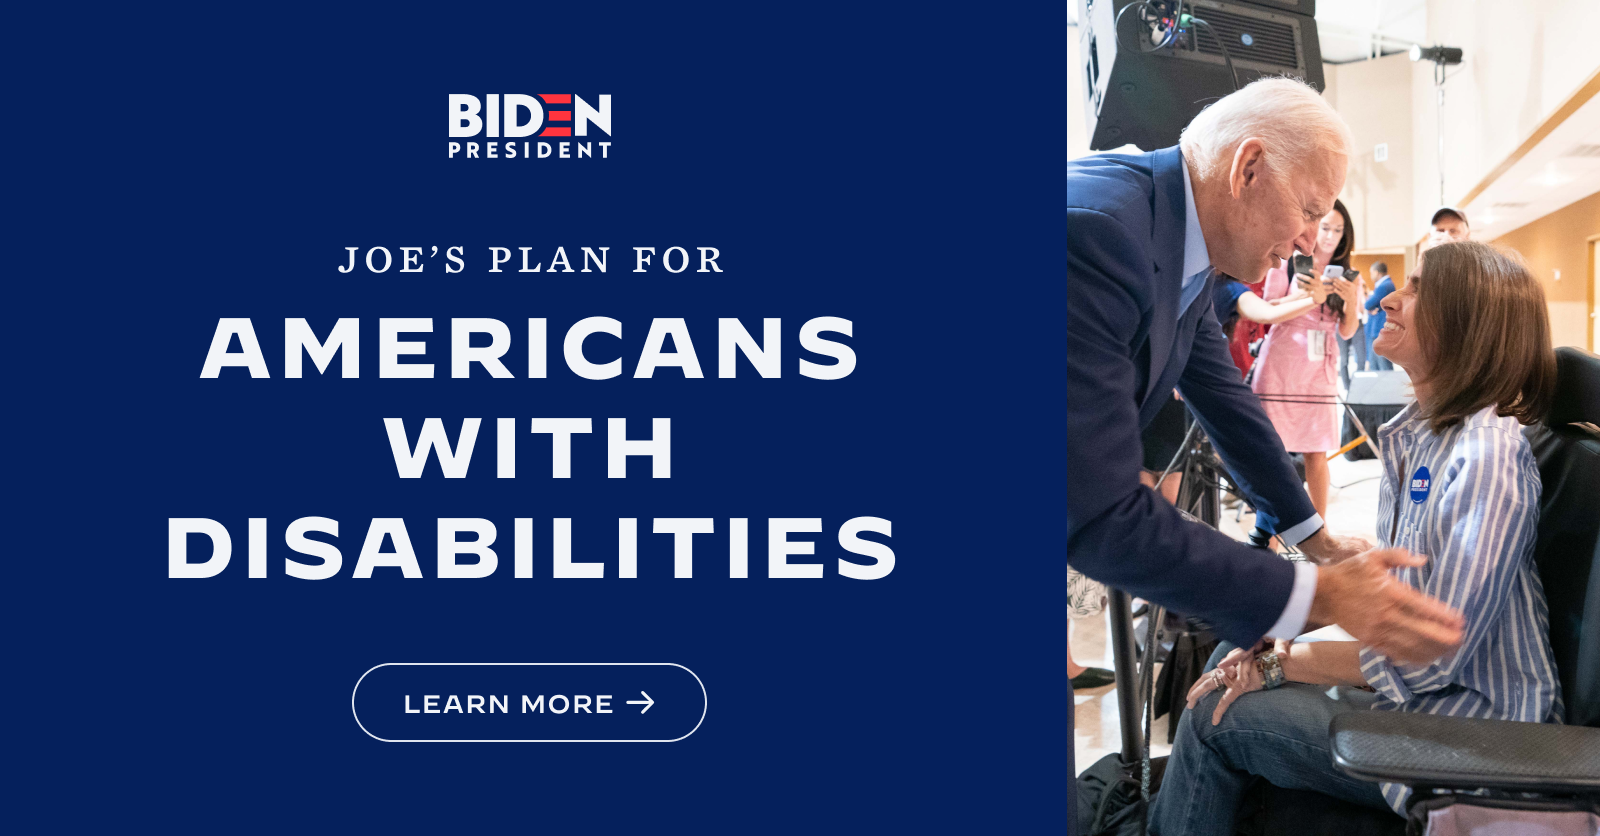 han godt At deaktivere Plan for Full Participation and Equality for People with Disabilities | Joe  Biden